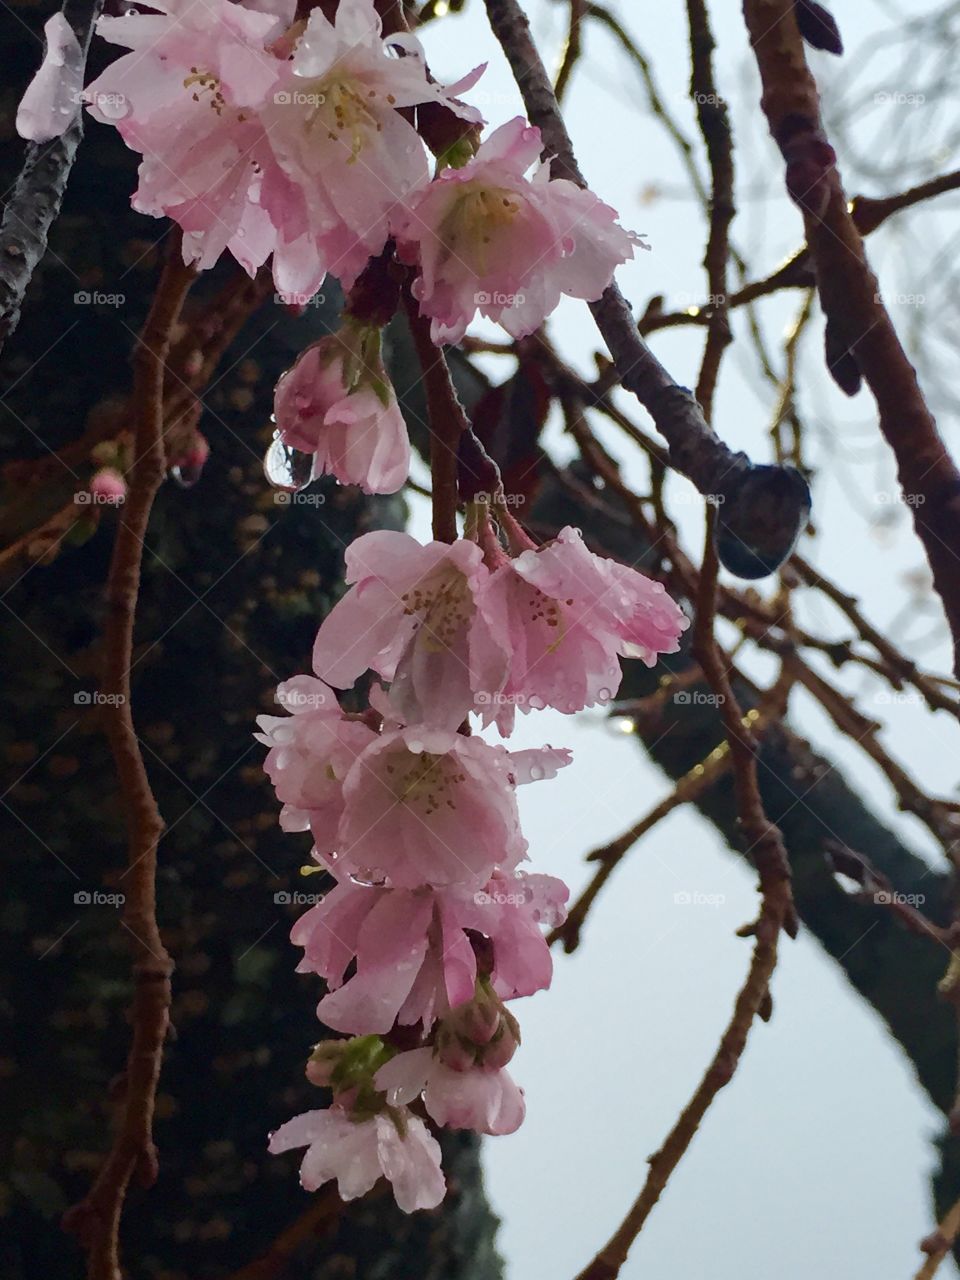 A January Spring, Pink Winter Blossoms